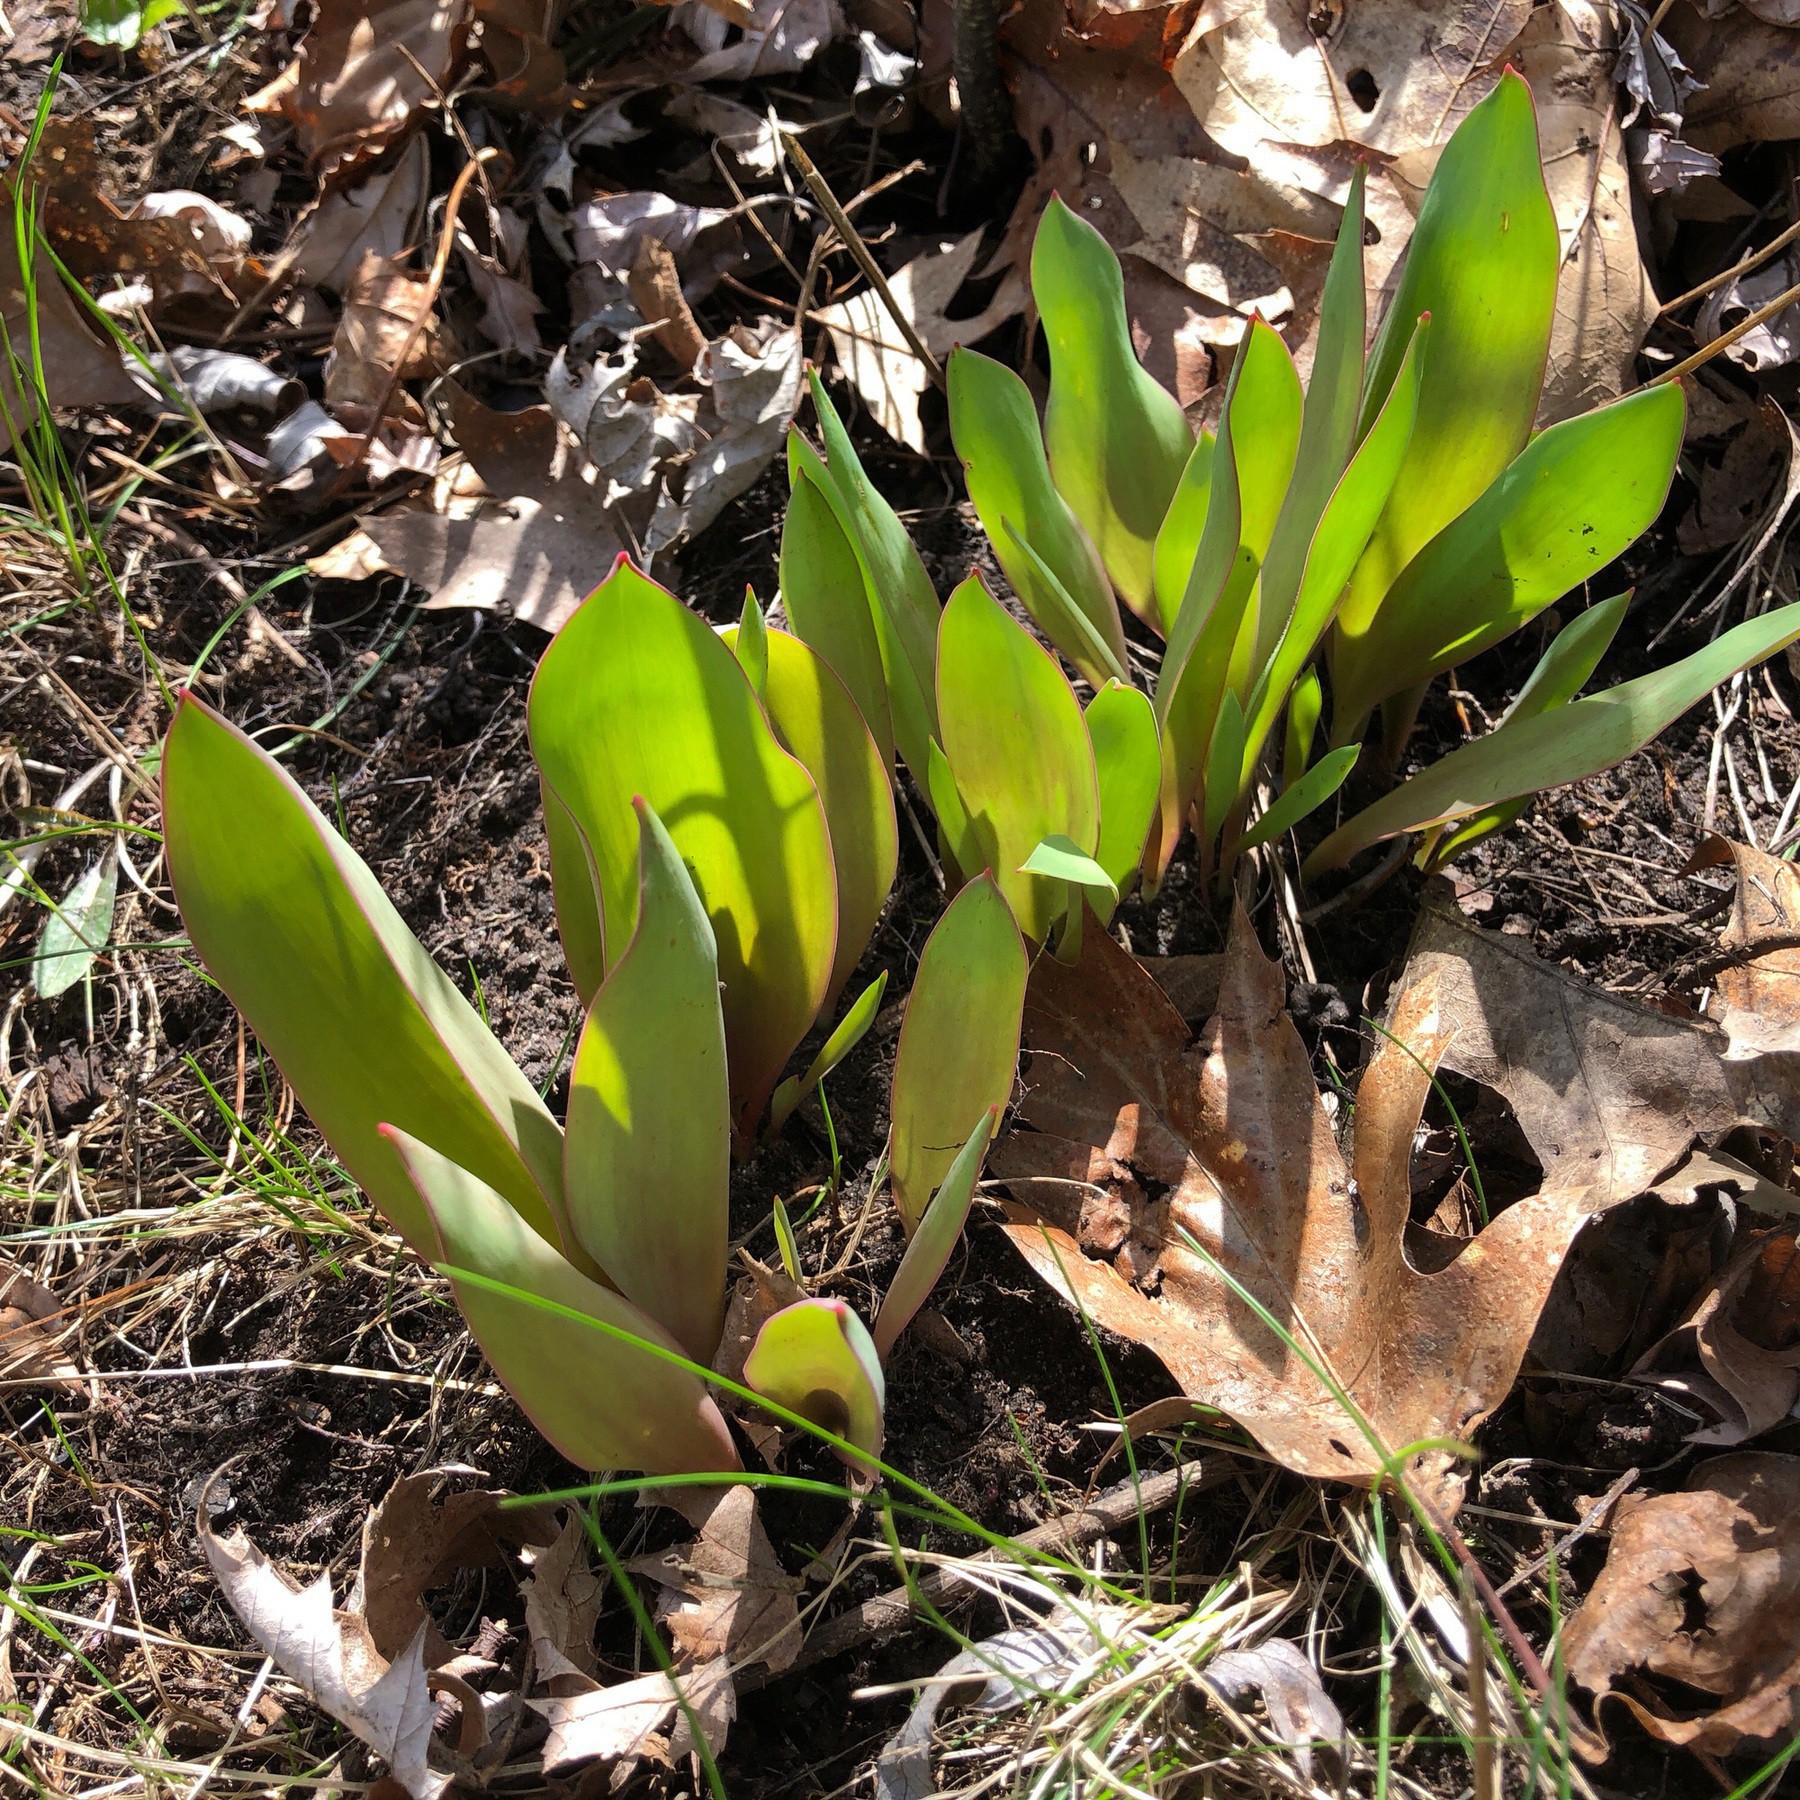 Leaves of flowers in the ground.